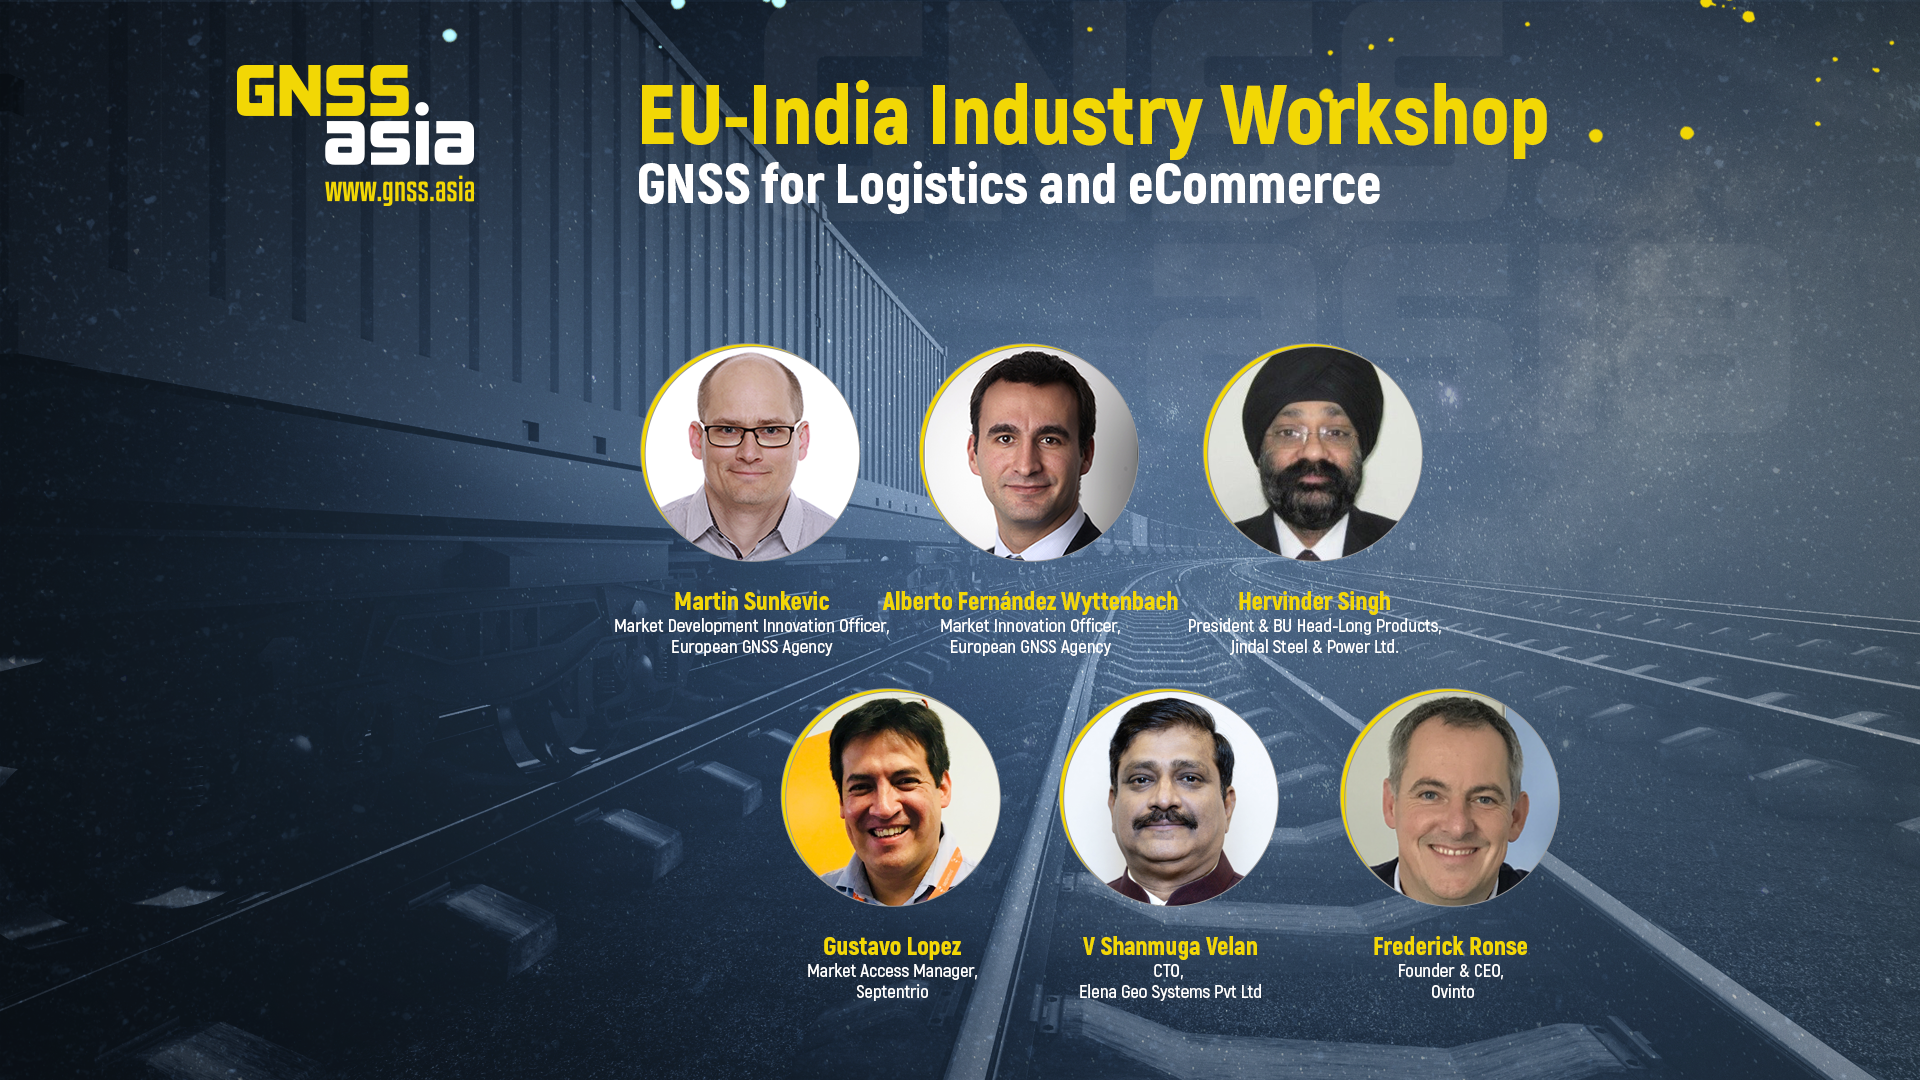 Flashback to the EU-India Online Workshop on GNSS for Logistics & eCommerce